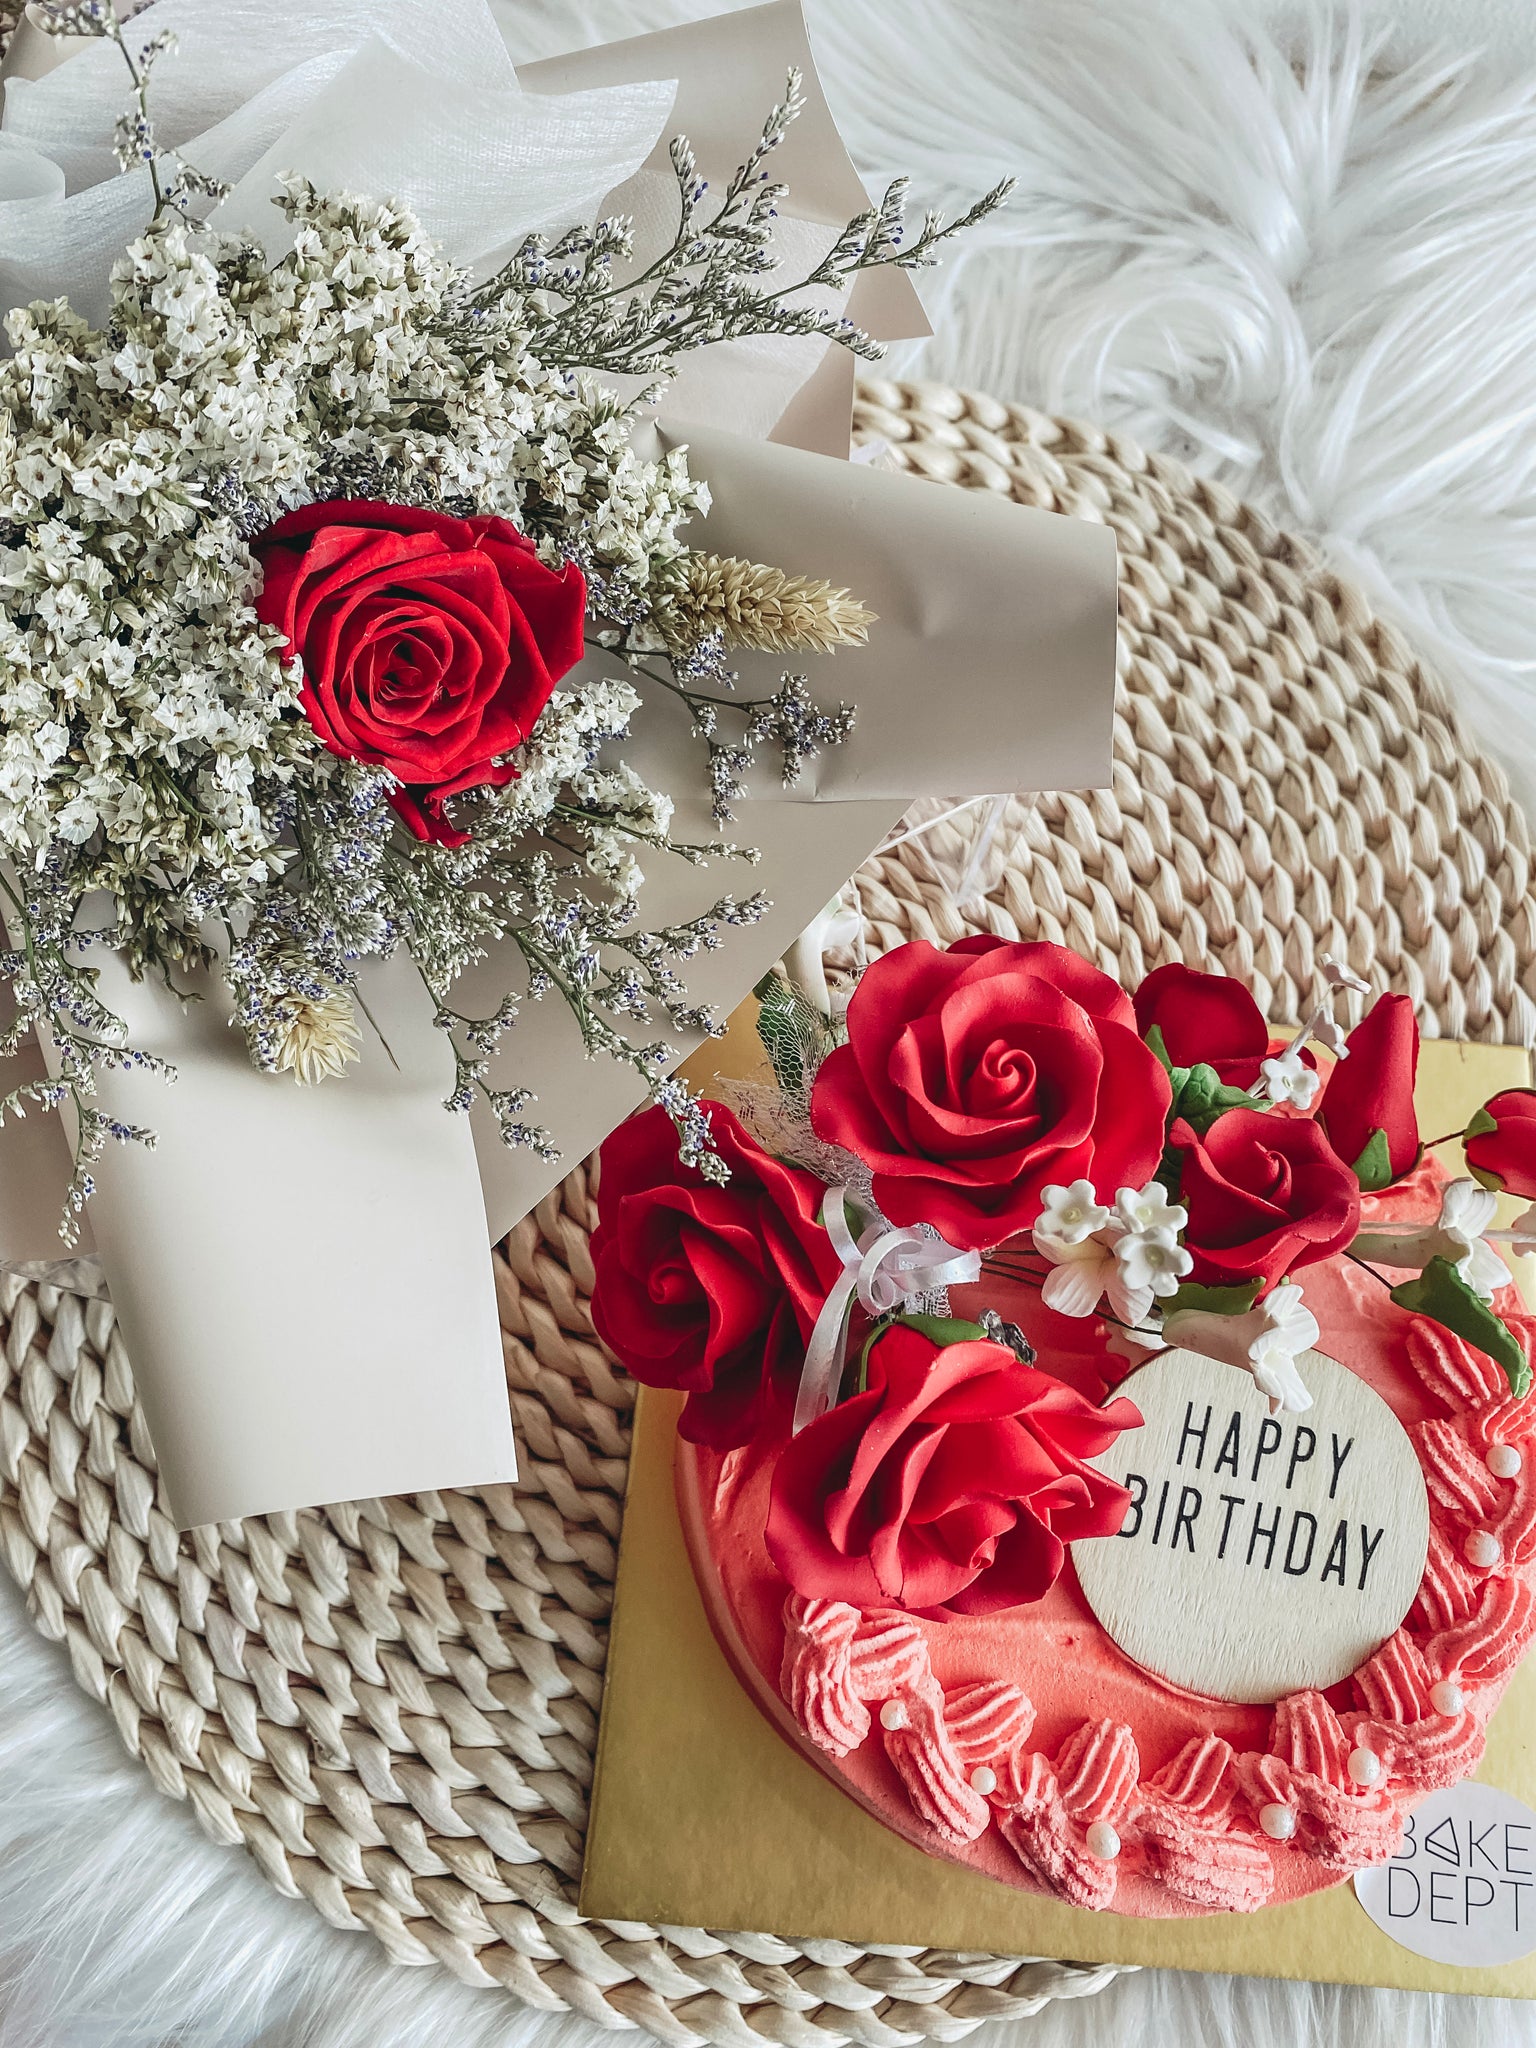 Islandwide Preserved flower and cake delivery